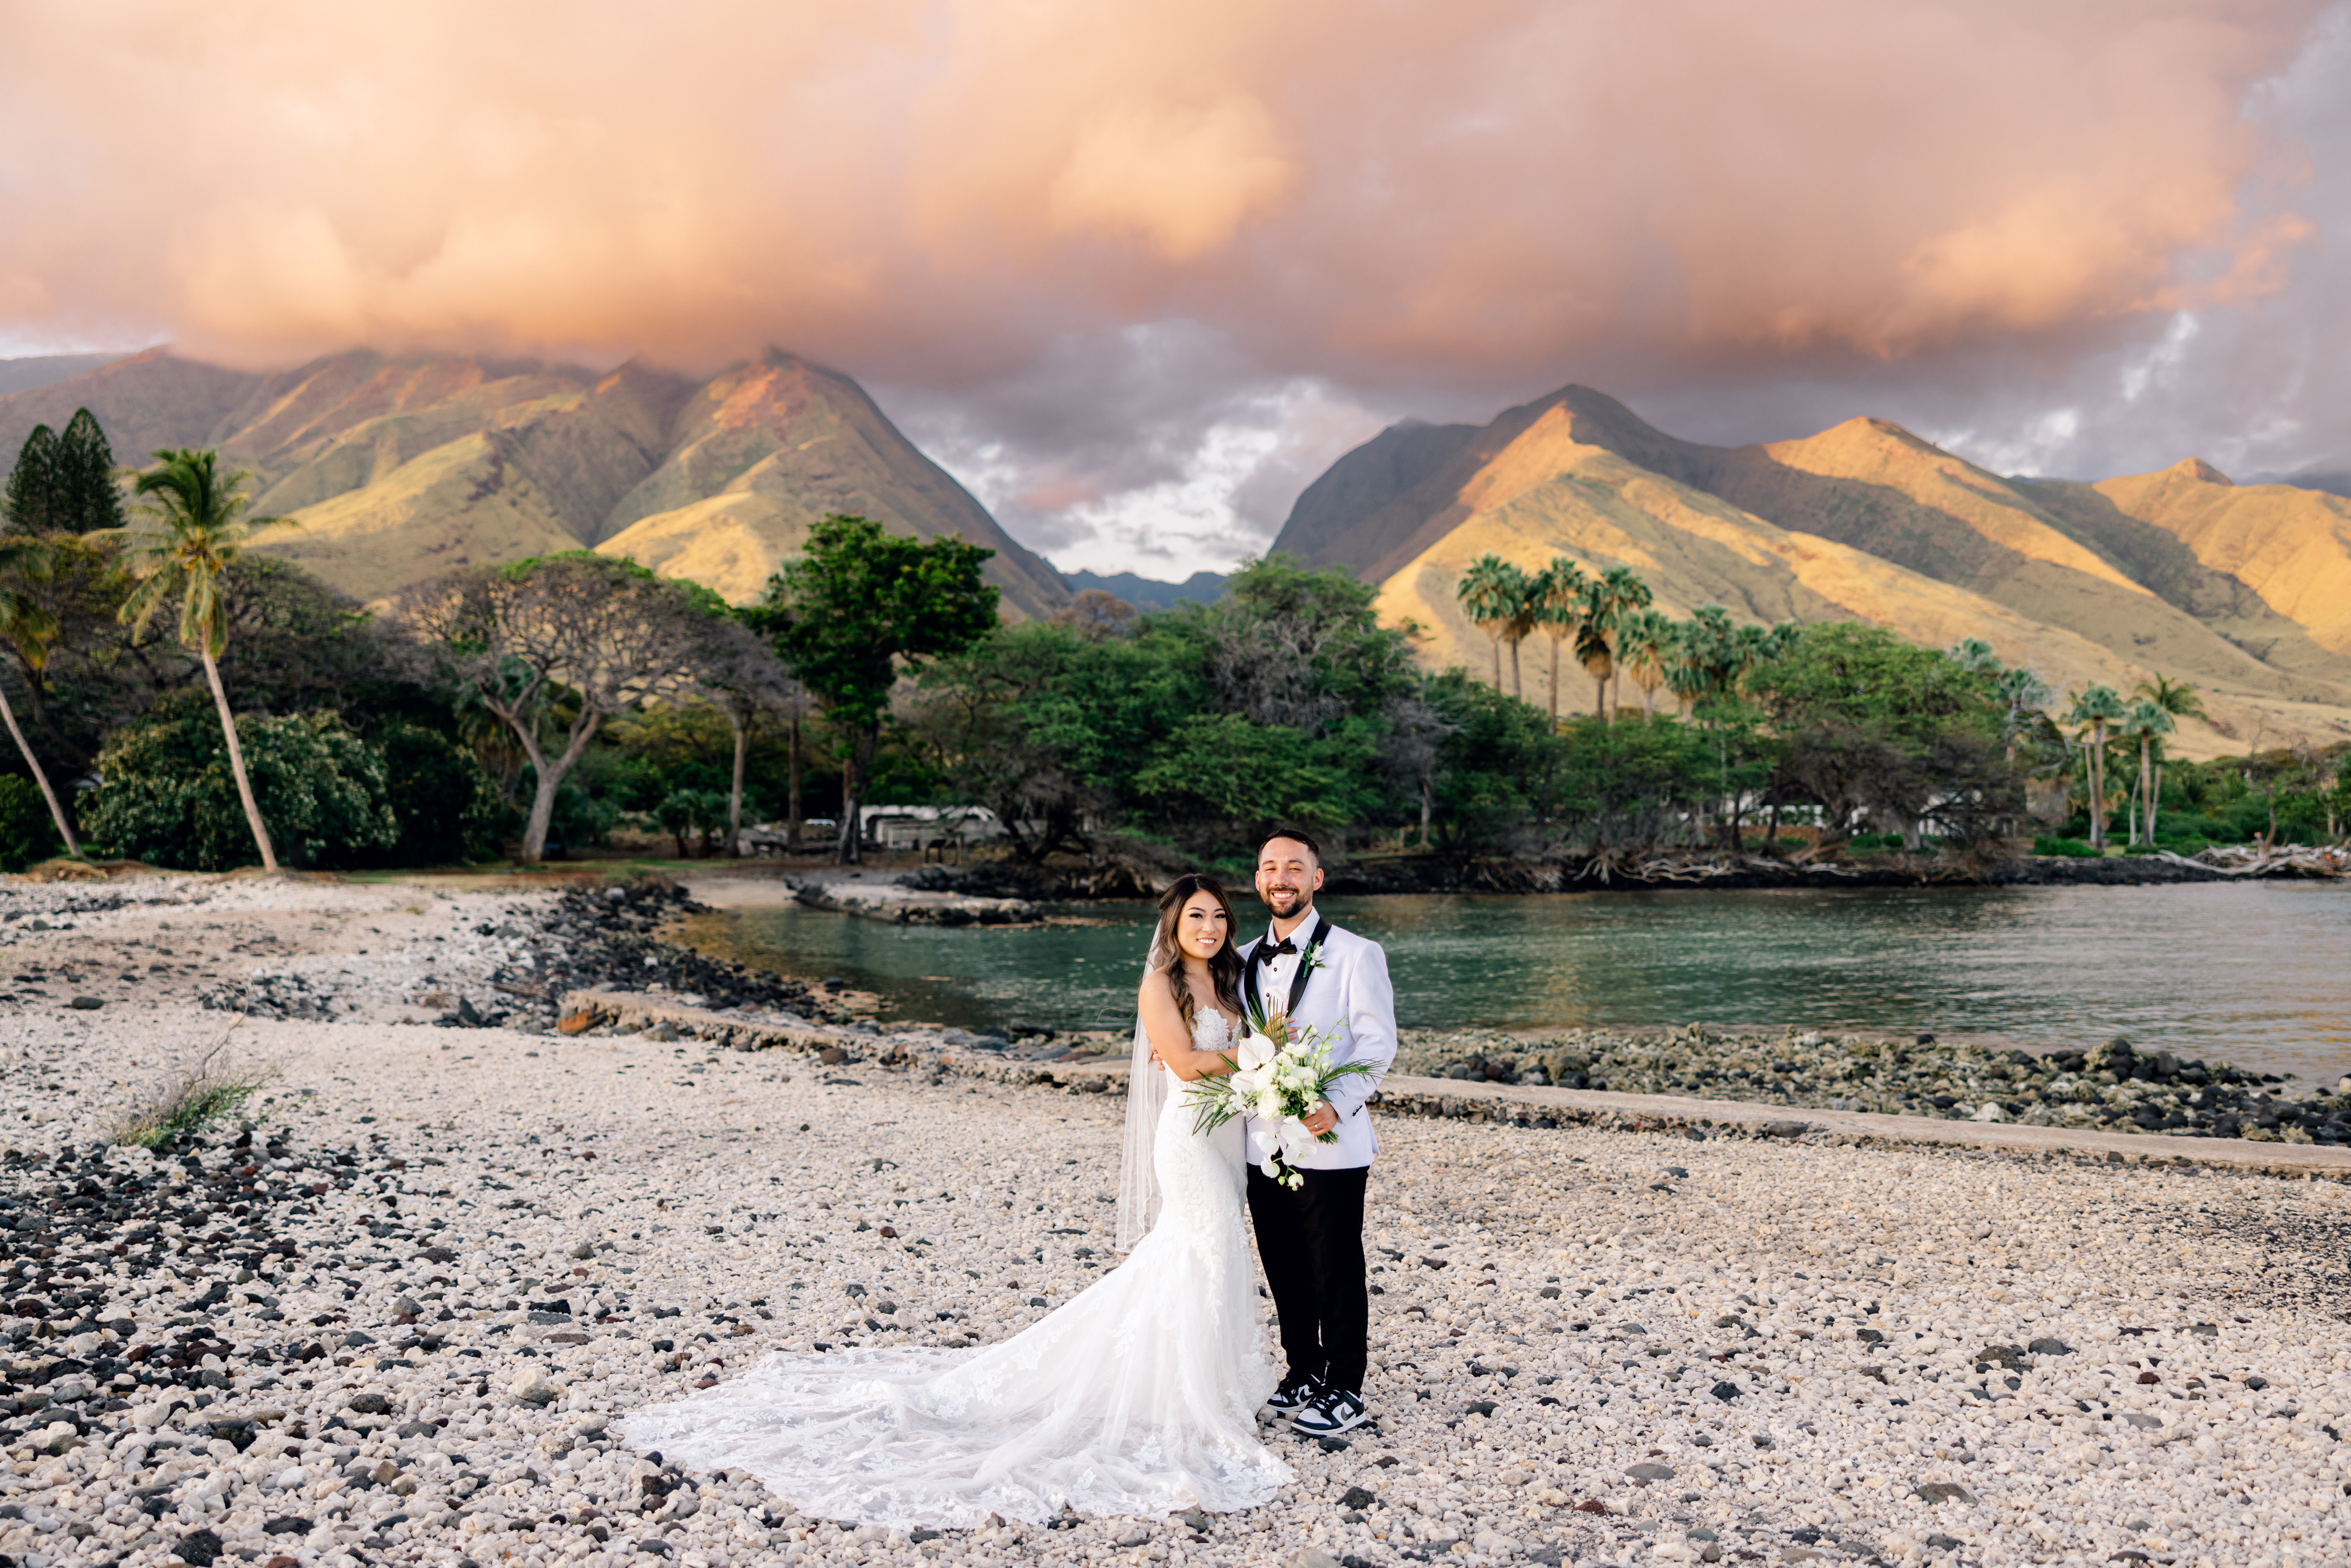 Woman wearing white wedding dress standing next to groom wearing black pants and a white blazer on a beach at Olowalu Maui.